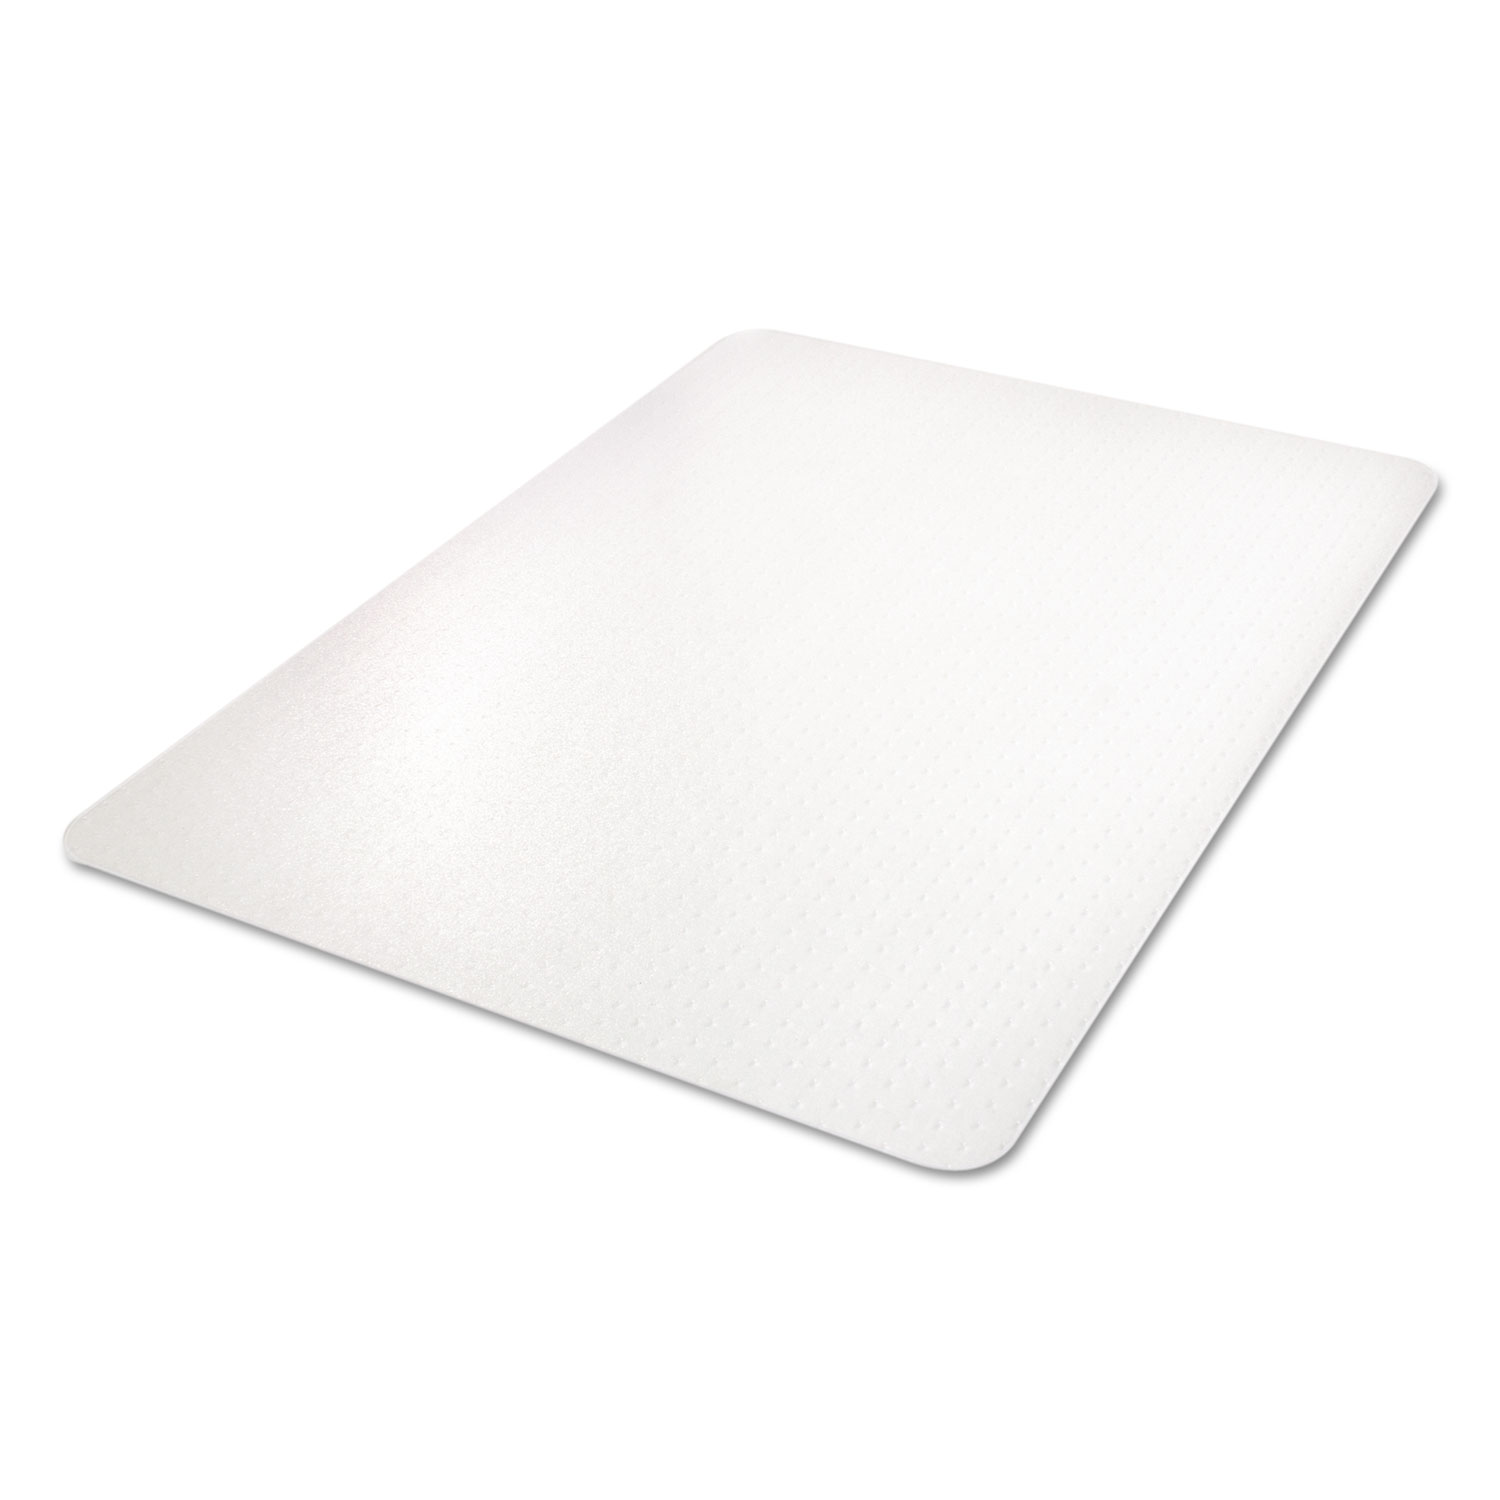 Clear Polycarbonate All Day Use Chair Mat for All Pile Carpet, 46 x 60